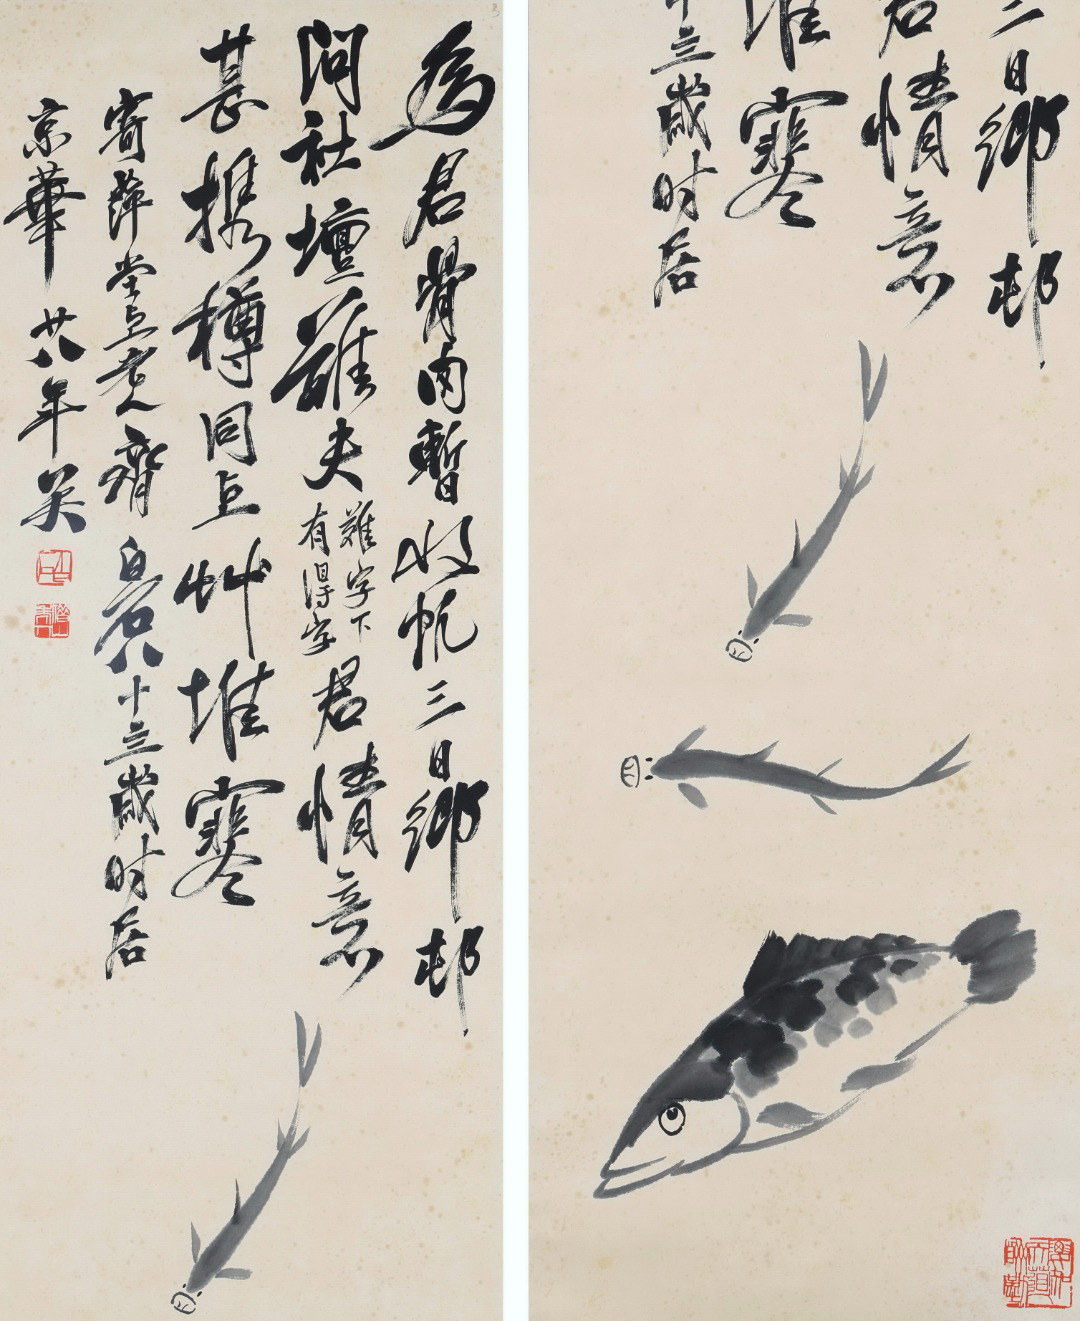 Four Pages of Chinese Scroll Painting Signed Qi Baishi - Image 5 of 9